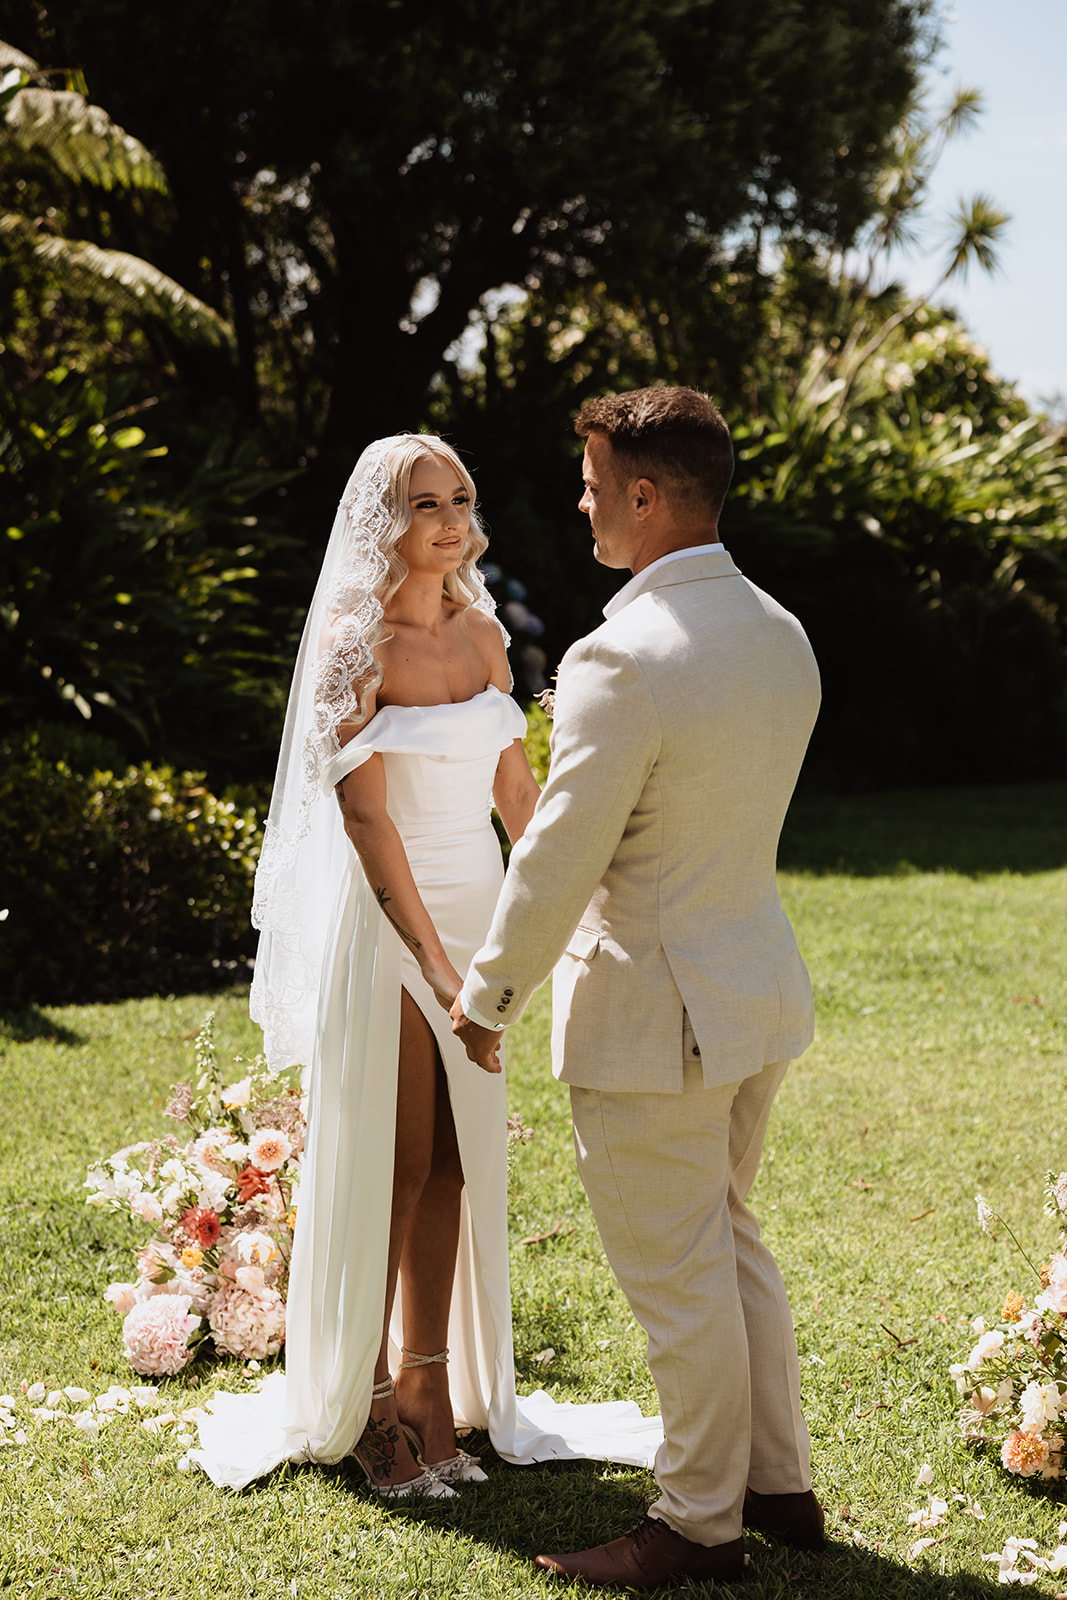 Wedding ceremony in Lindesay House, Darling Point New South Wales